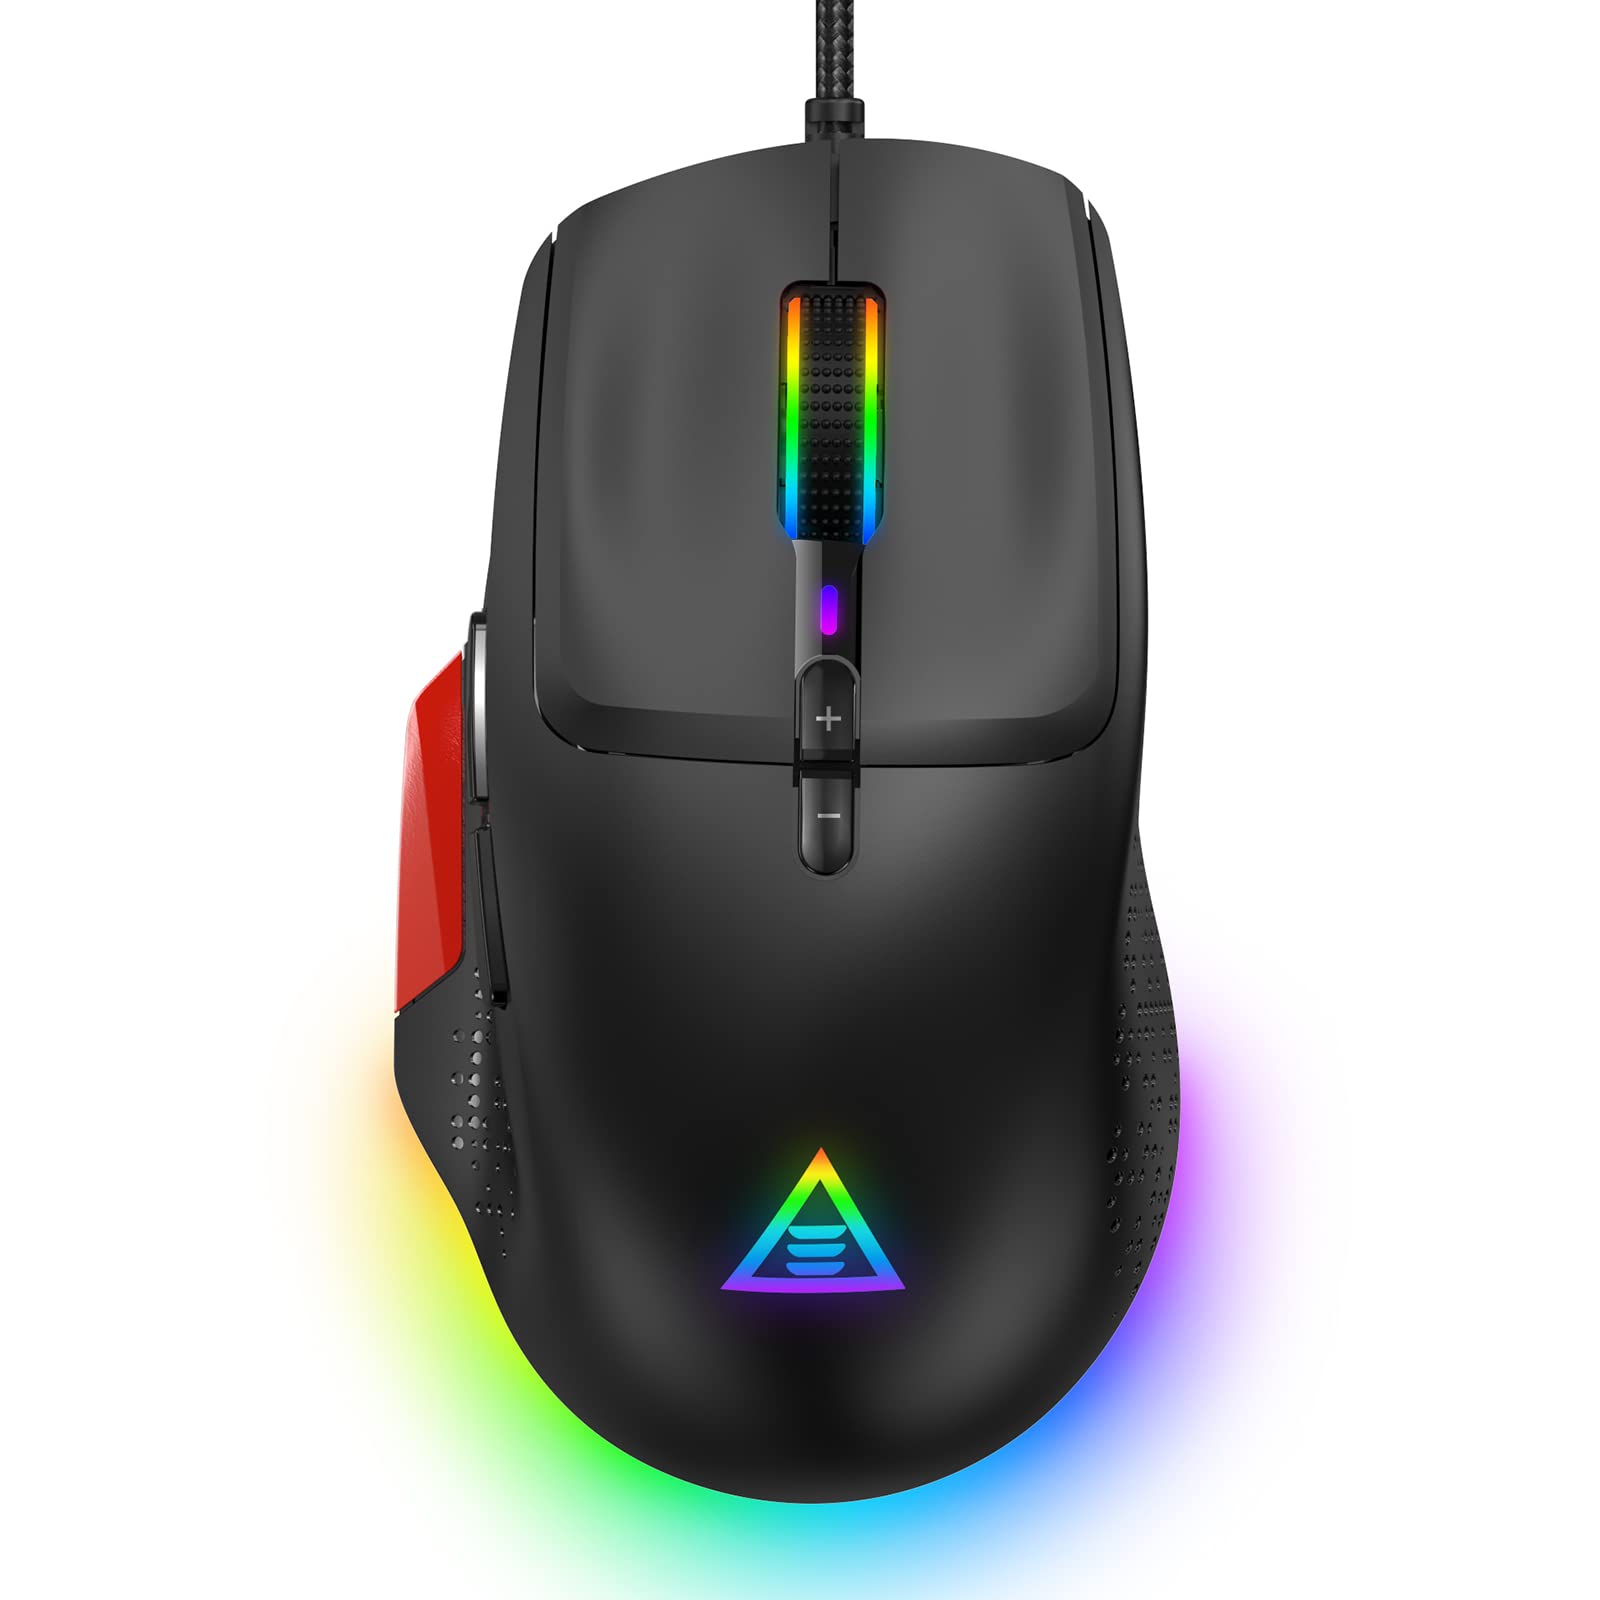 EKSA Gaming Mouse, 12 RGB Backlight Modes Wired PC Computer Mouse with Sniper Button, High-Precision Adjustable 12000 DPI, 9 Programmable Buttons for Laptop Gamer Work Office